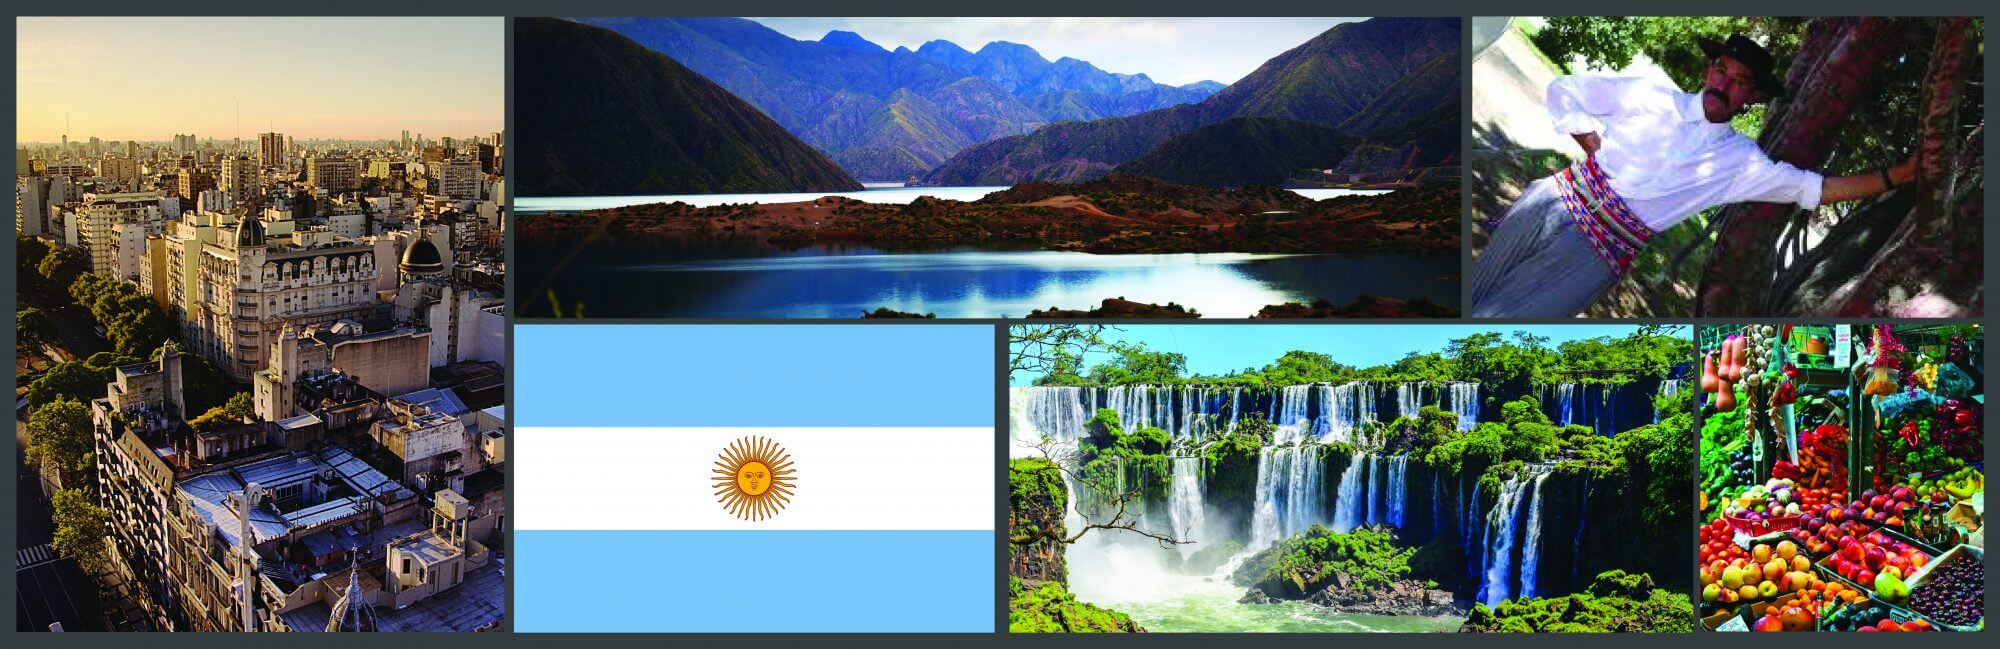 Longhaul Argentina Tours with inspiresport